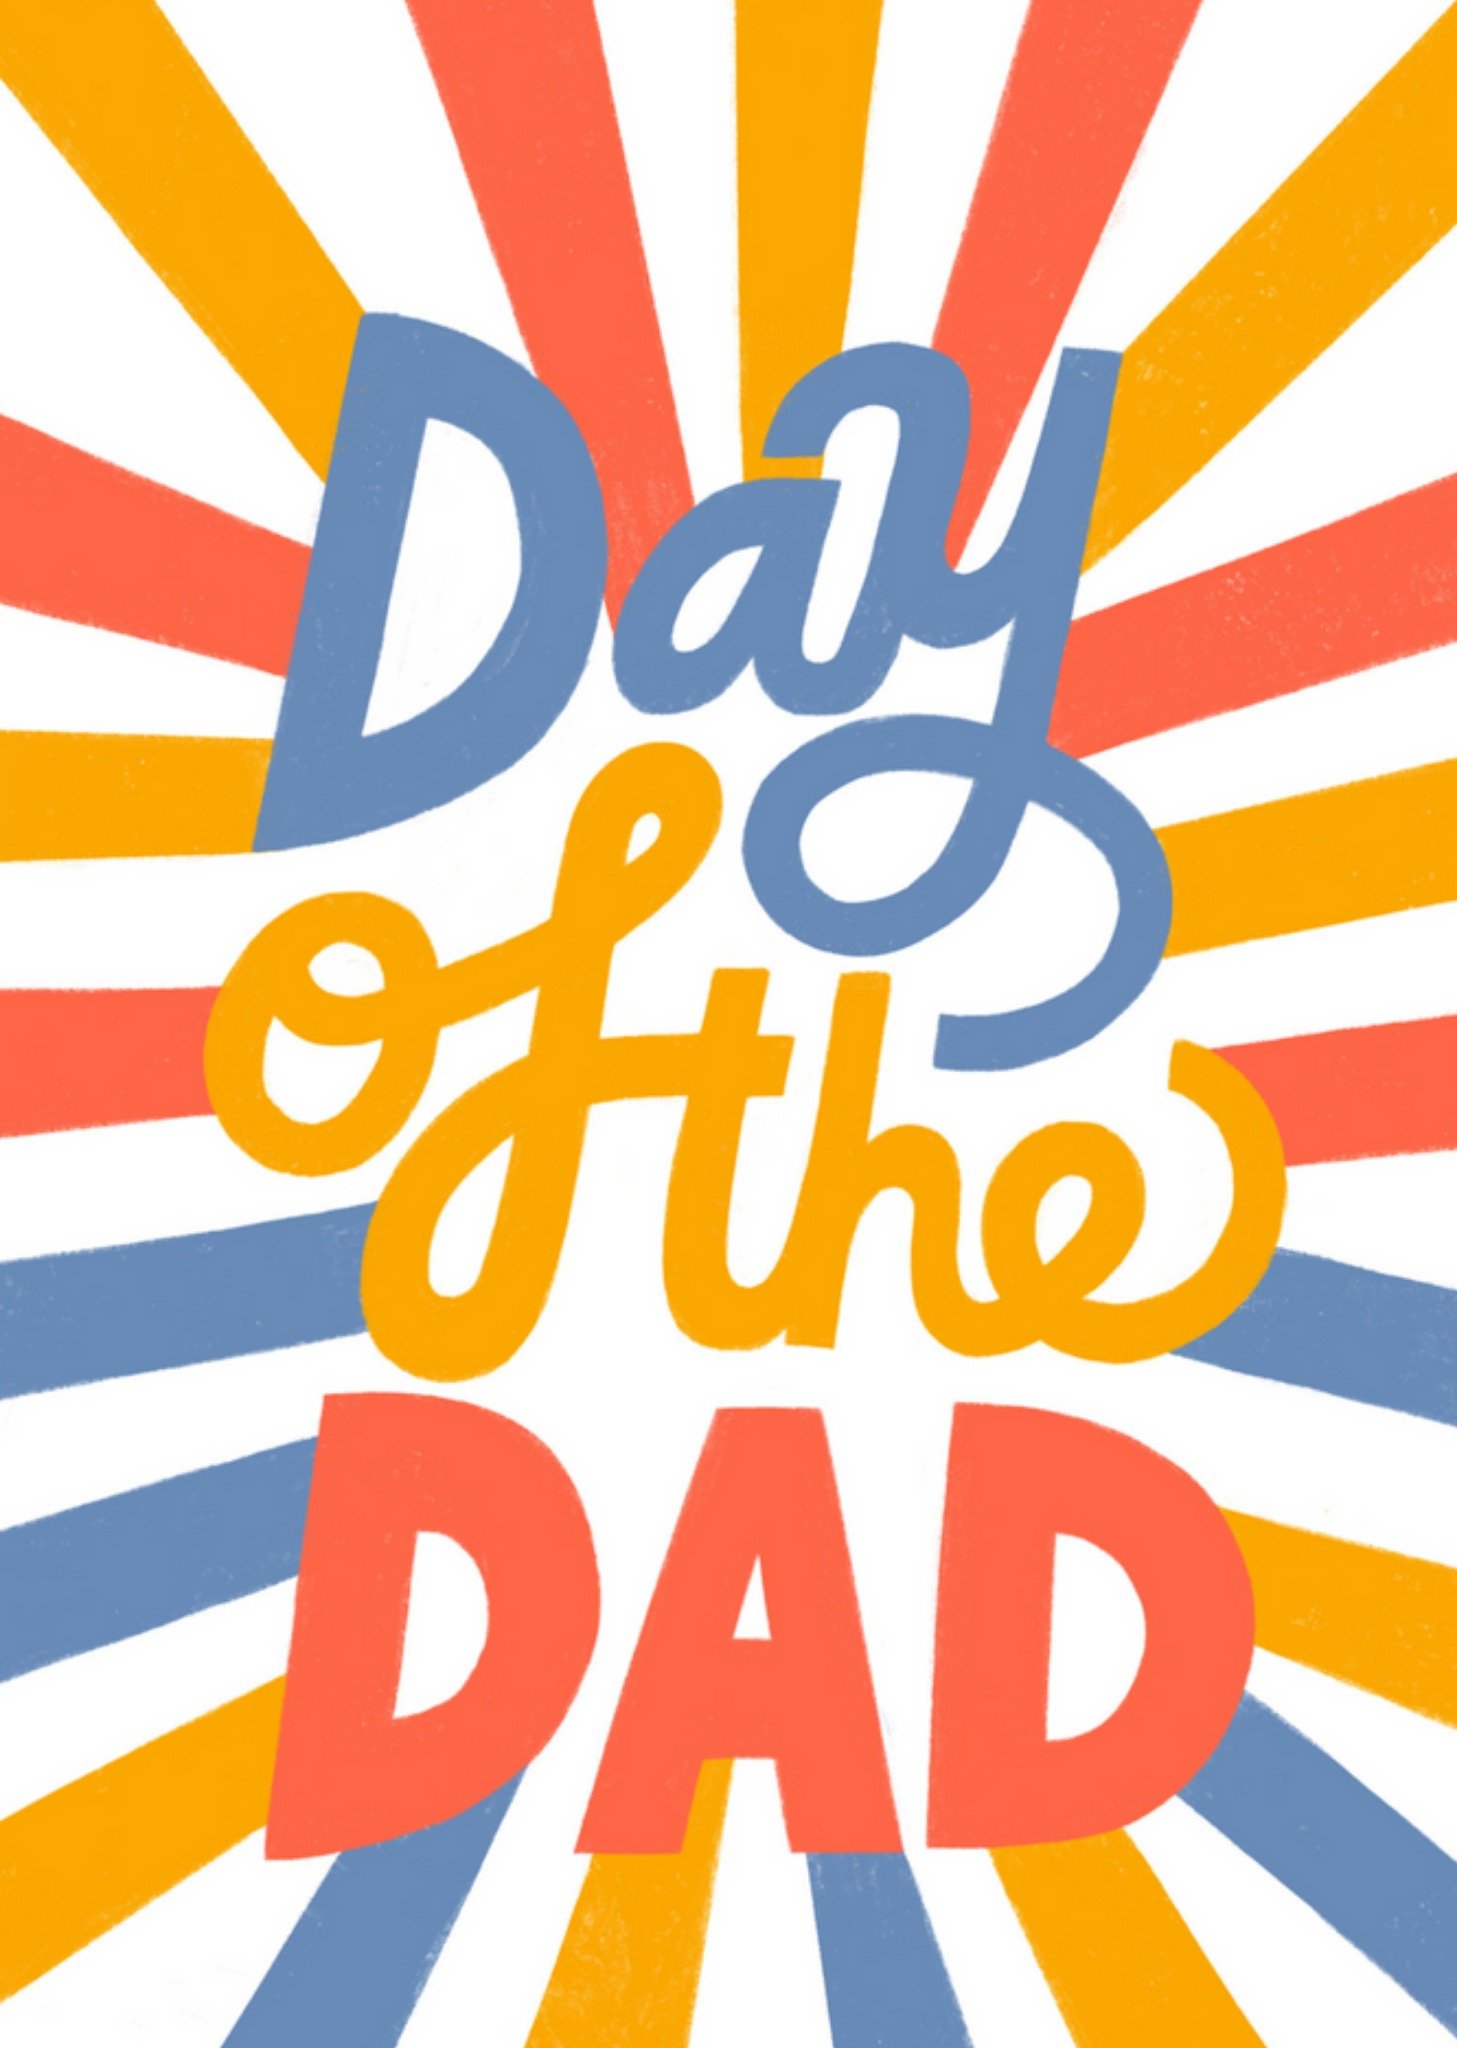 The Cardy Club - Vaderdagkaart - day of the dad